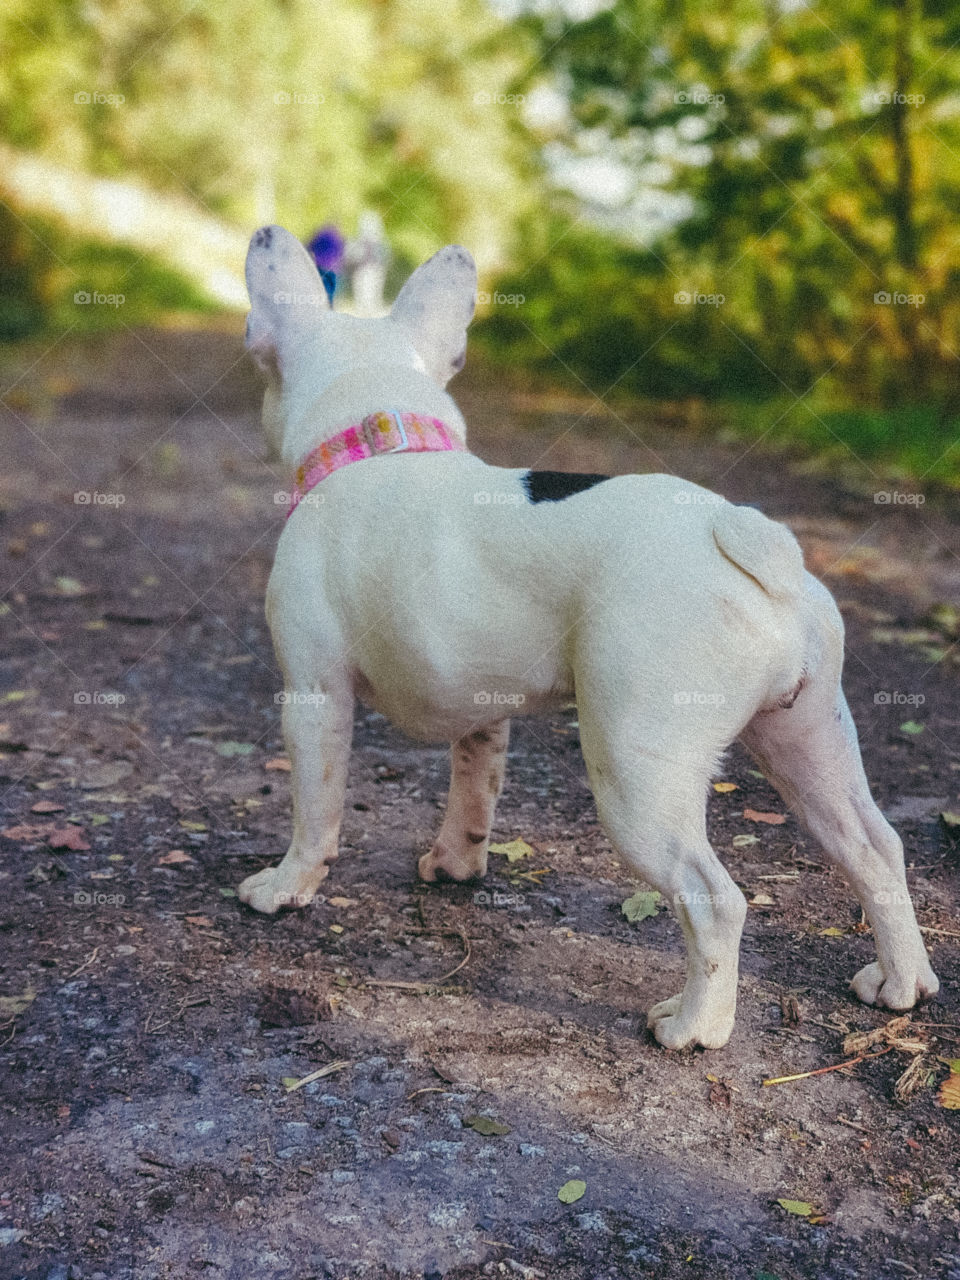 Florence, our French bulldog patiently waiting to allow others wight their dogs to pass by without disturbing them